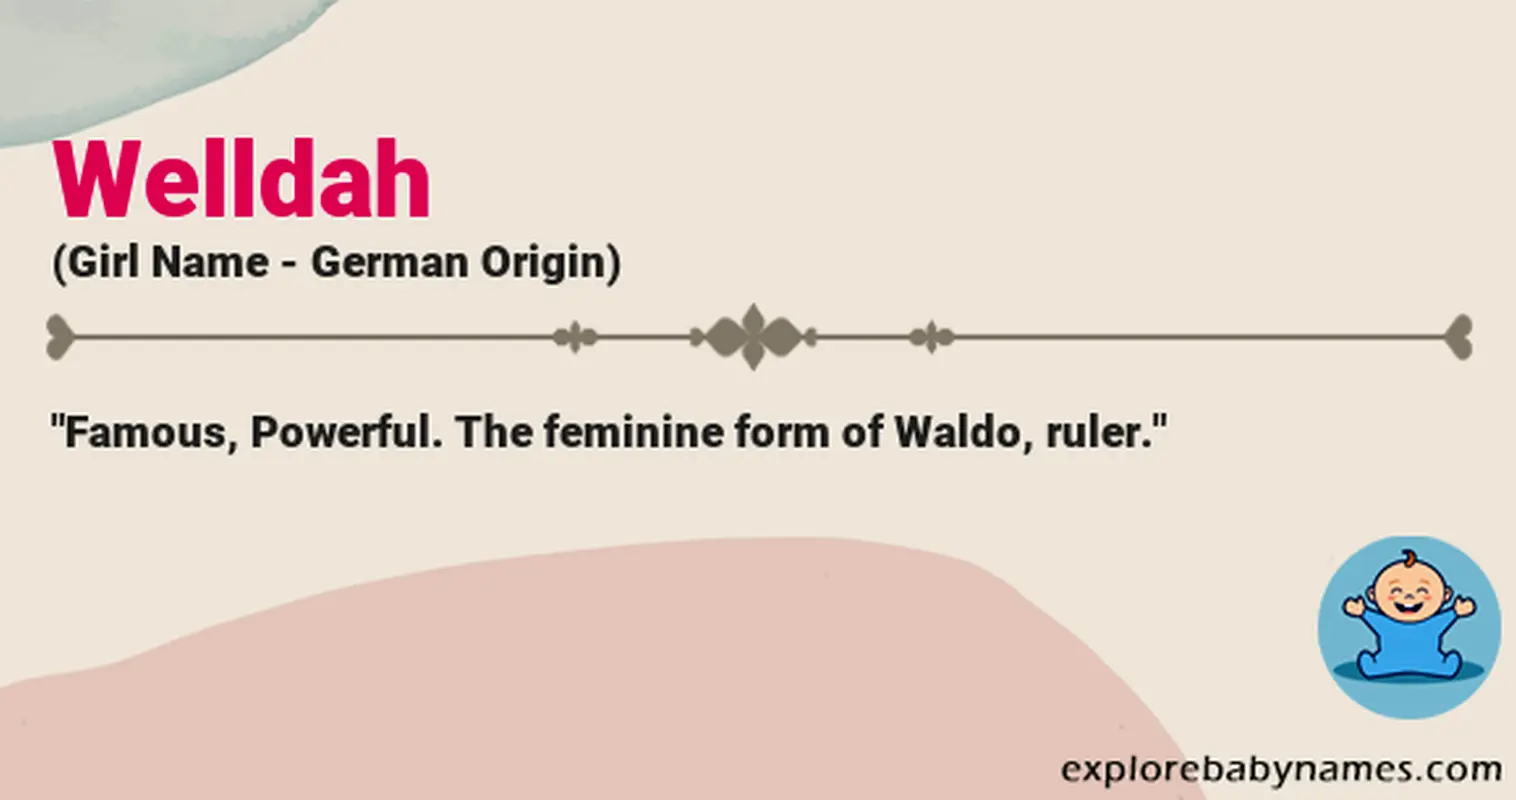 Meaning of Welldah